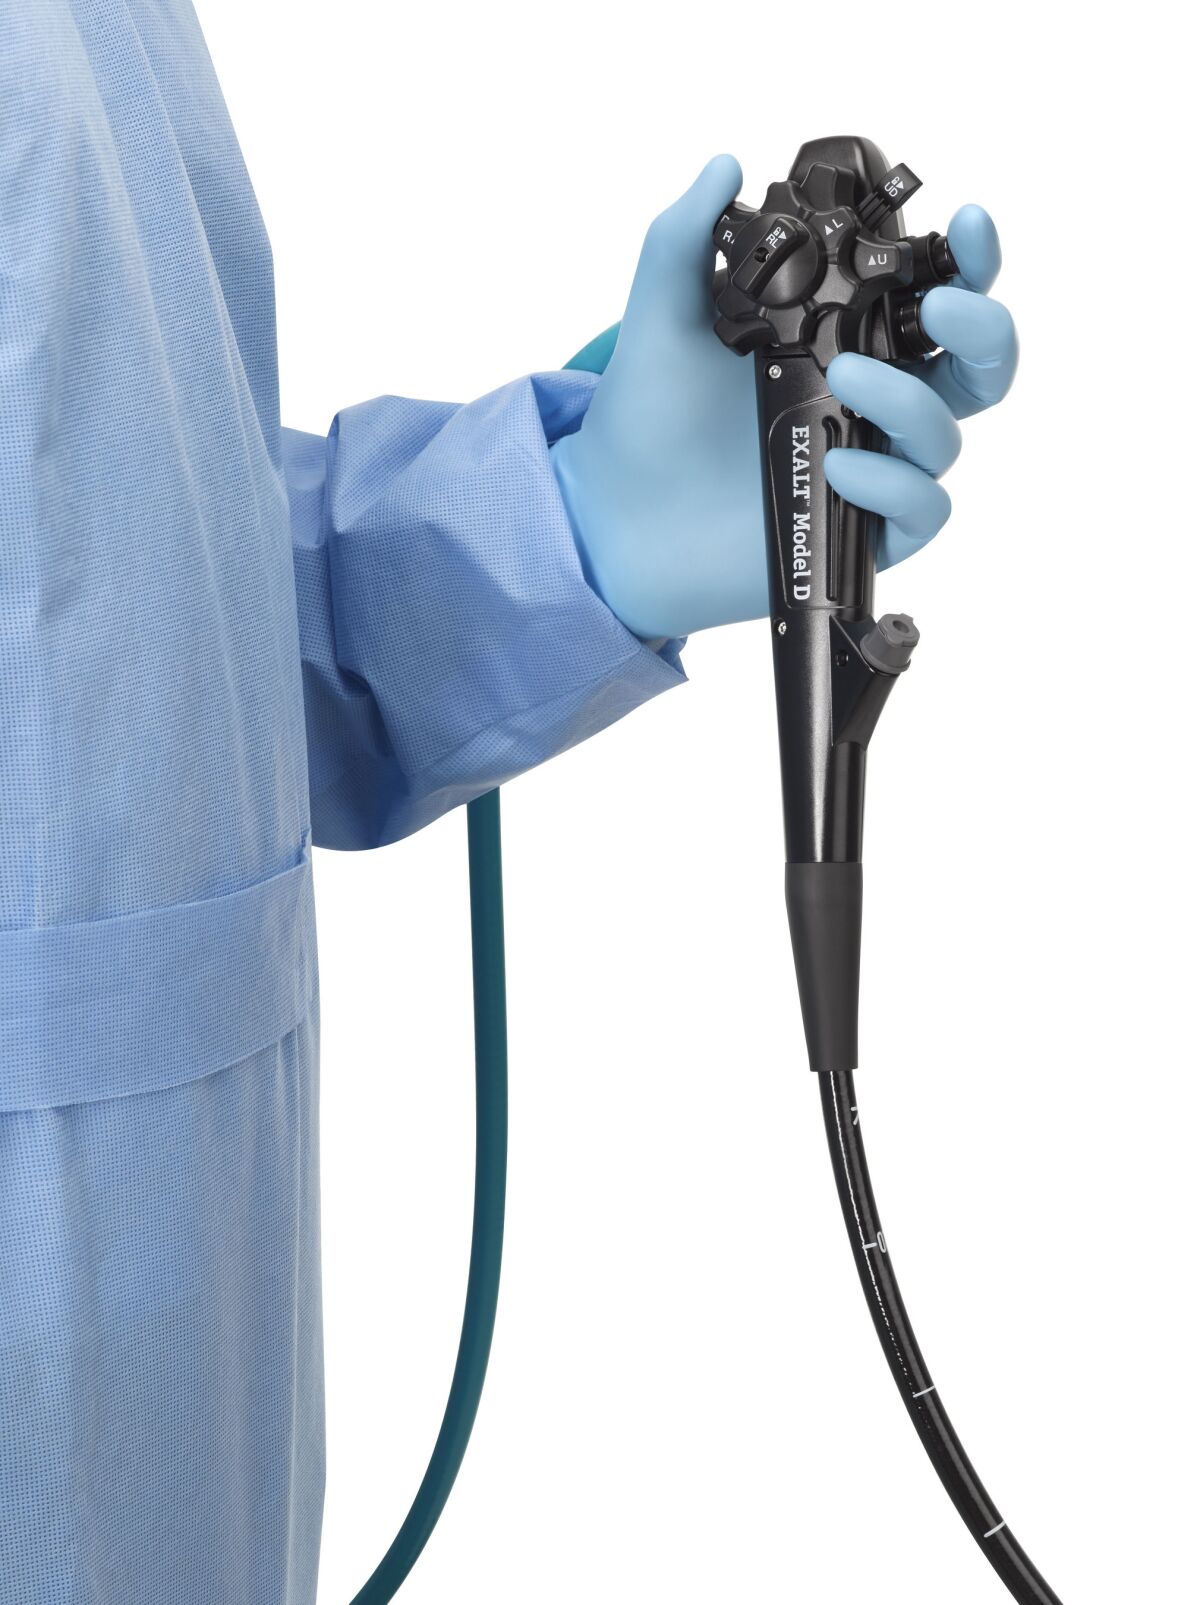 Disposable medical scope